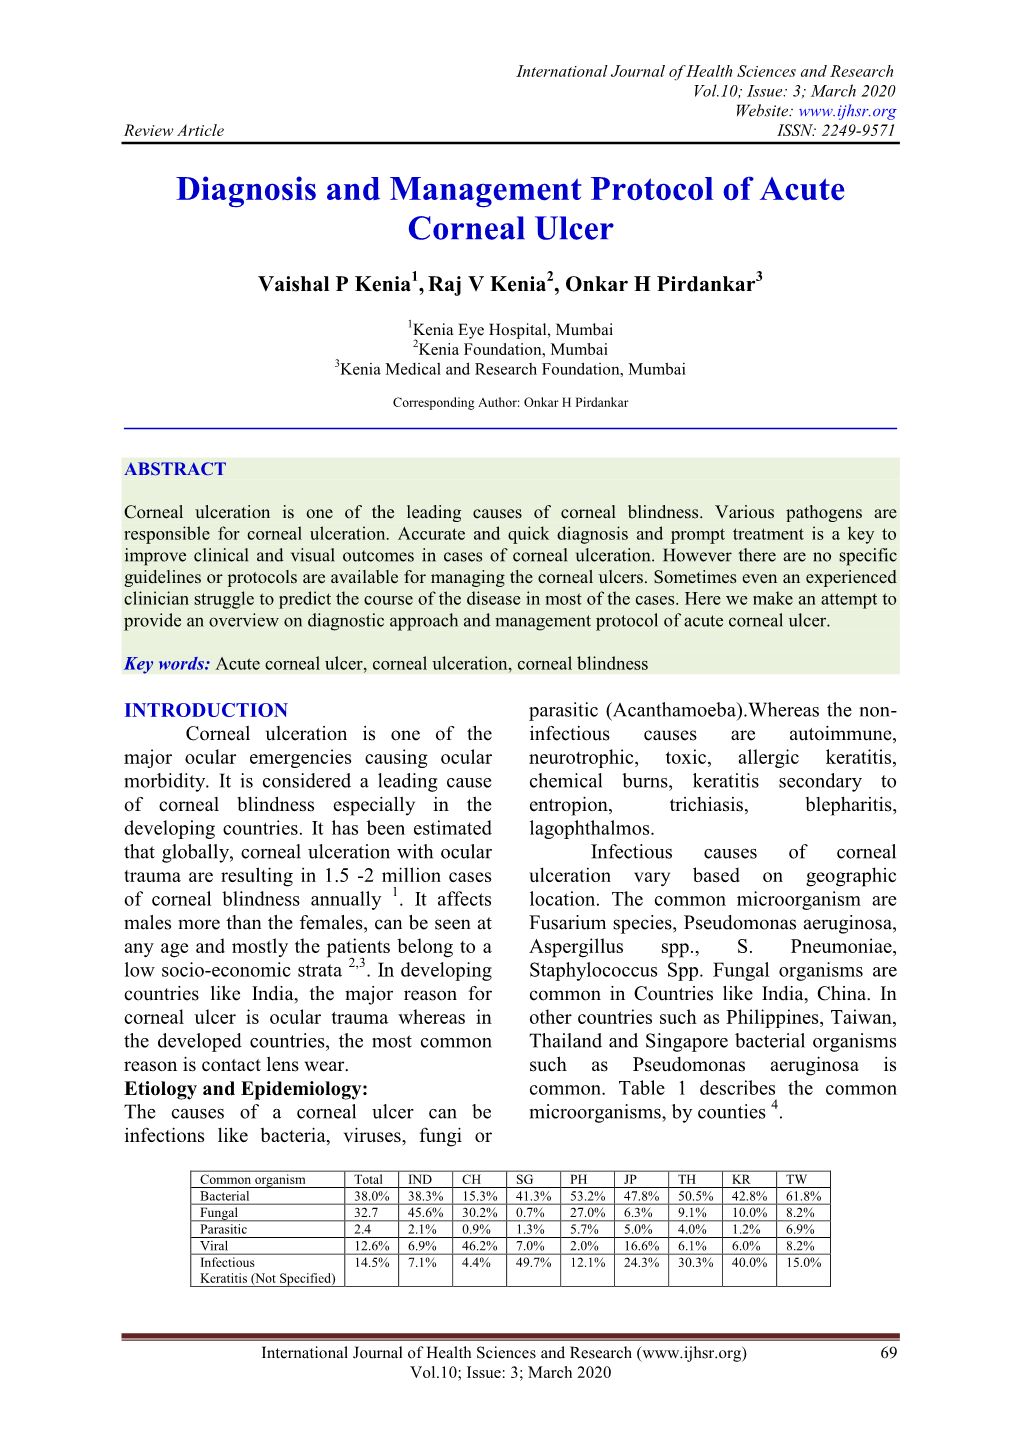 Diagnosis and Management Protocol of Acute Corneal Ulcer